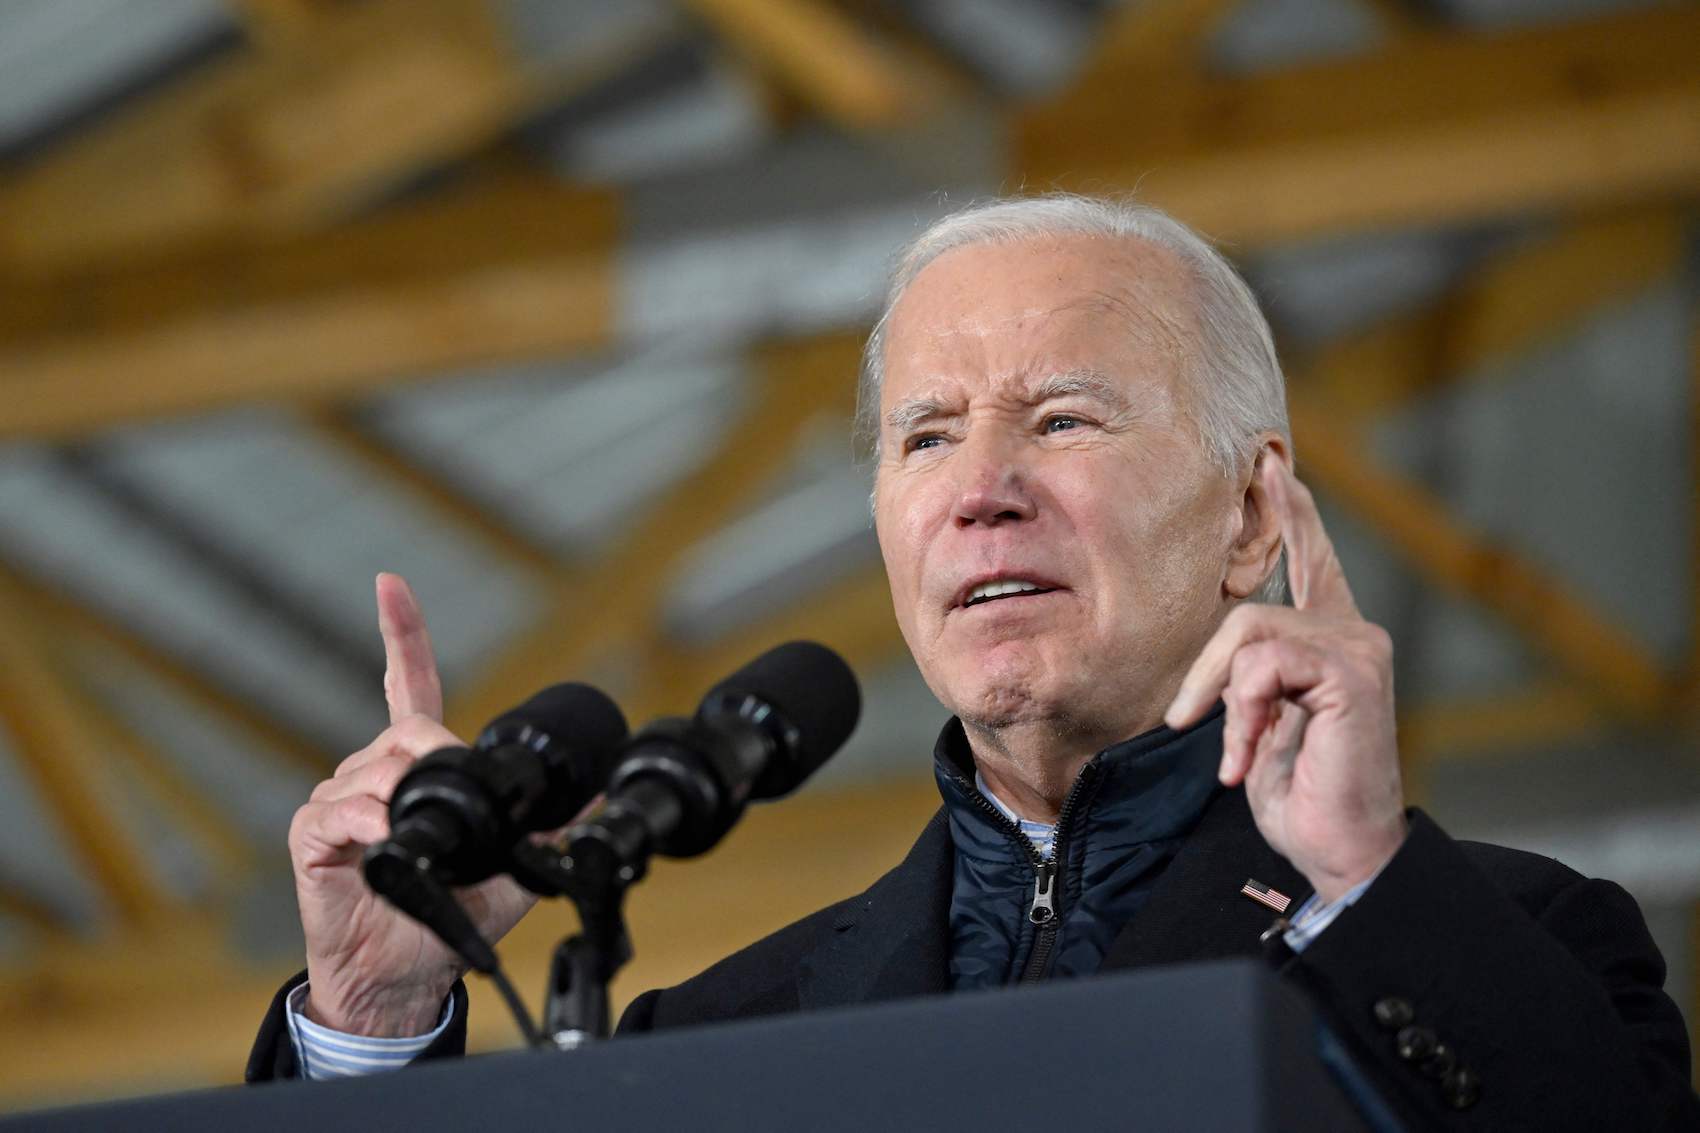 Biden backs ‘pause’ in Israel-Hamas conflict for hostage release.